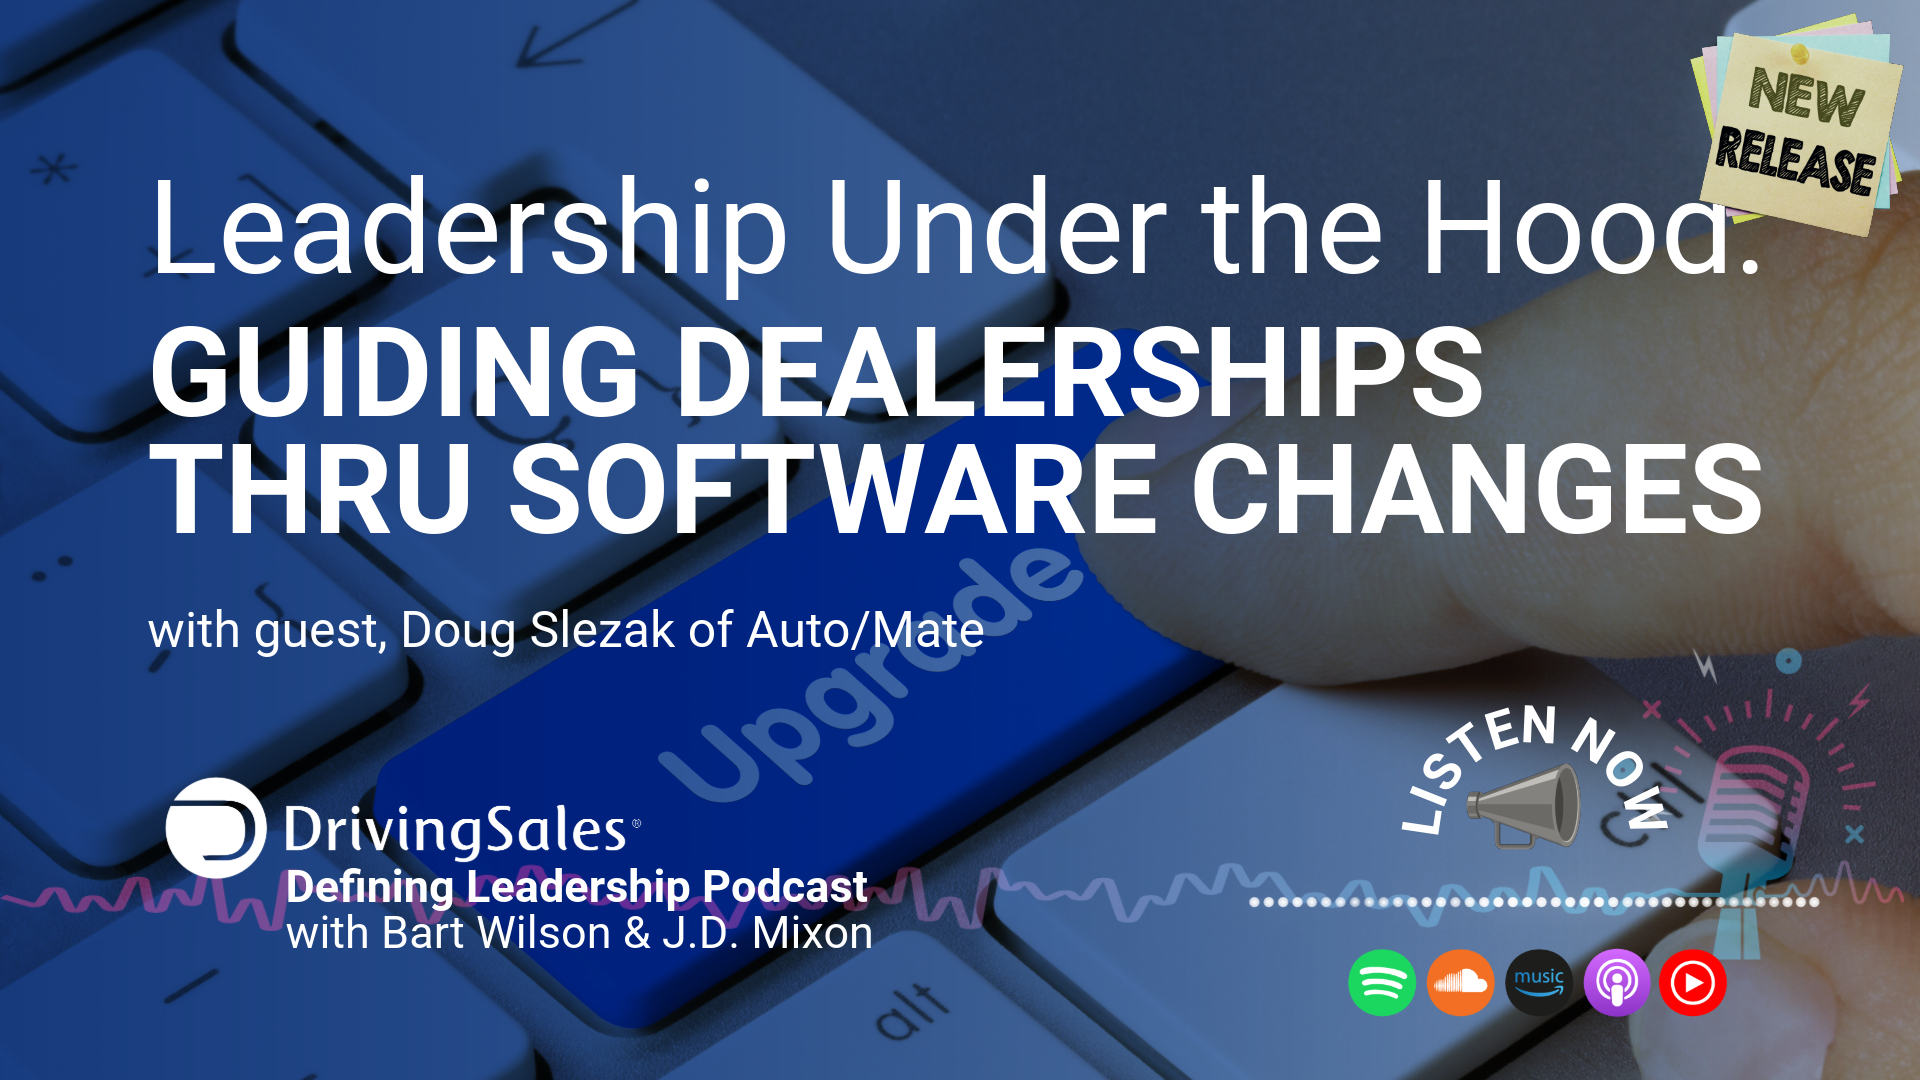 The image for the podcast episode "Leadership Under the Hood: Guiding Dealerships Thru Software Changes" features a visually engaging and informative cover design. The main title is prominently displayed at the top, with the subtitle "GUIDING DEALERSHIPS THRU SOFTWARE CHANGES" just below. A photo of a computer keyboard sets the technological theme, emphasizing the focus on software changes. On the left, there's an overlay containing the podcast's name, "DrivingSales Defining Leadership Podcast," along with the names of the hosts, Bart Wilson & J.D. Mixon, and the guest, Doug Slezak of Auto/Mate. The right side of the image features podcast platform icons like Spotify, Apple Music, and others, inviting viewers to "LISTEN NOW." The overall design is modern and professional, appealing directly to the intended audience of automotive professionals interested in leadership and technological advancements in their field.